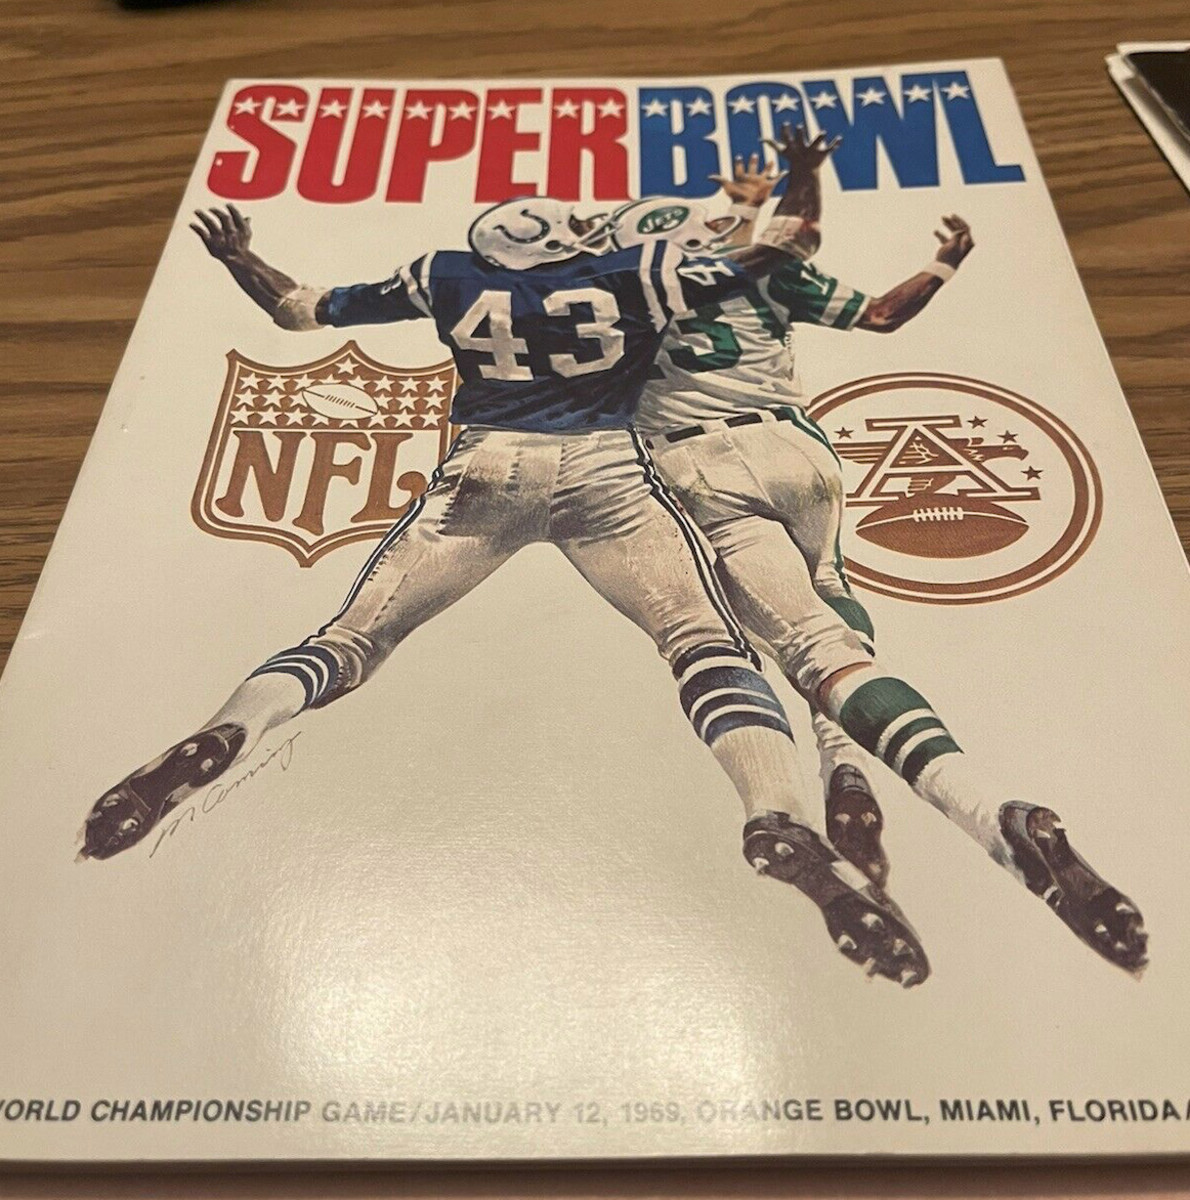 Program from Super Bowl III included in a press kit from the game.